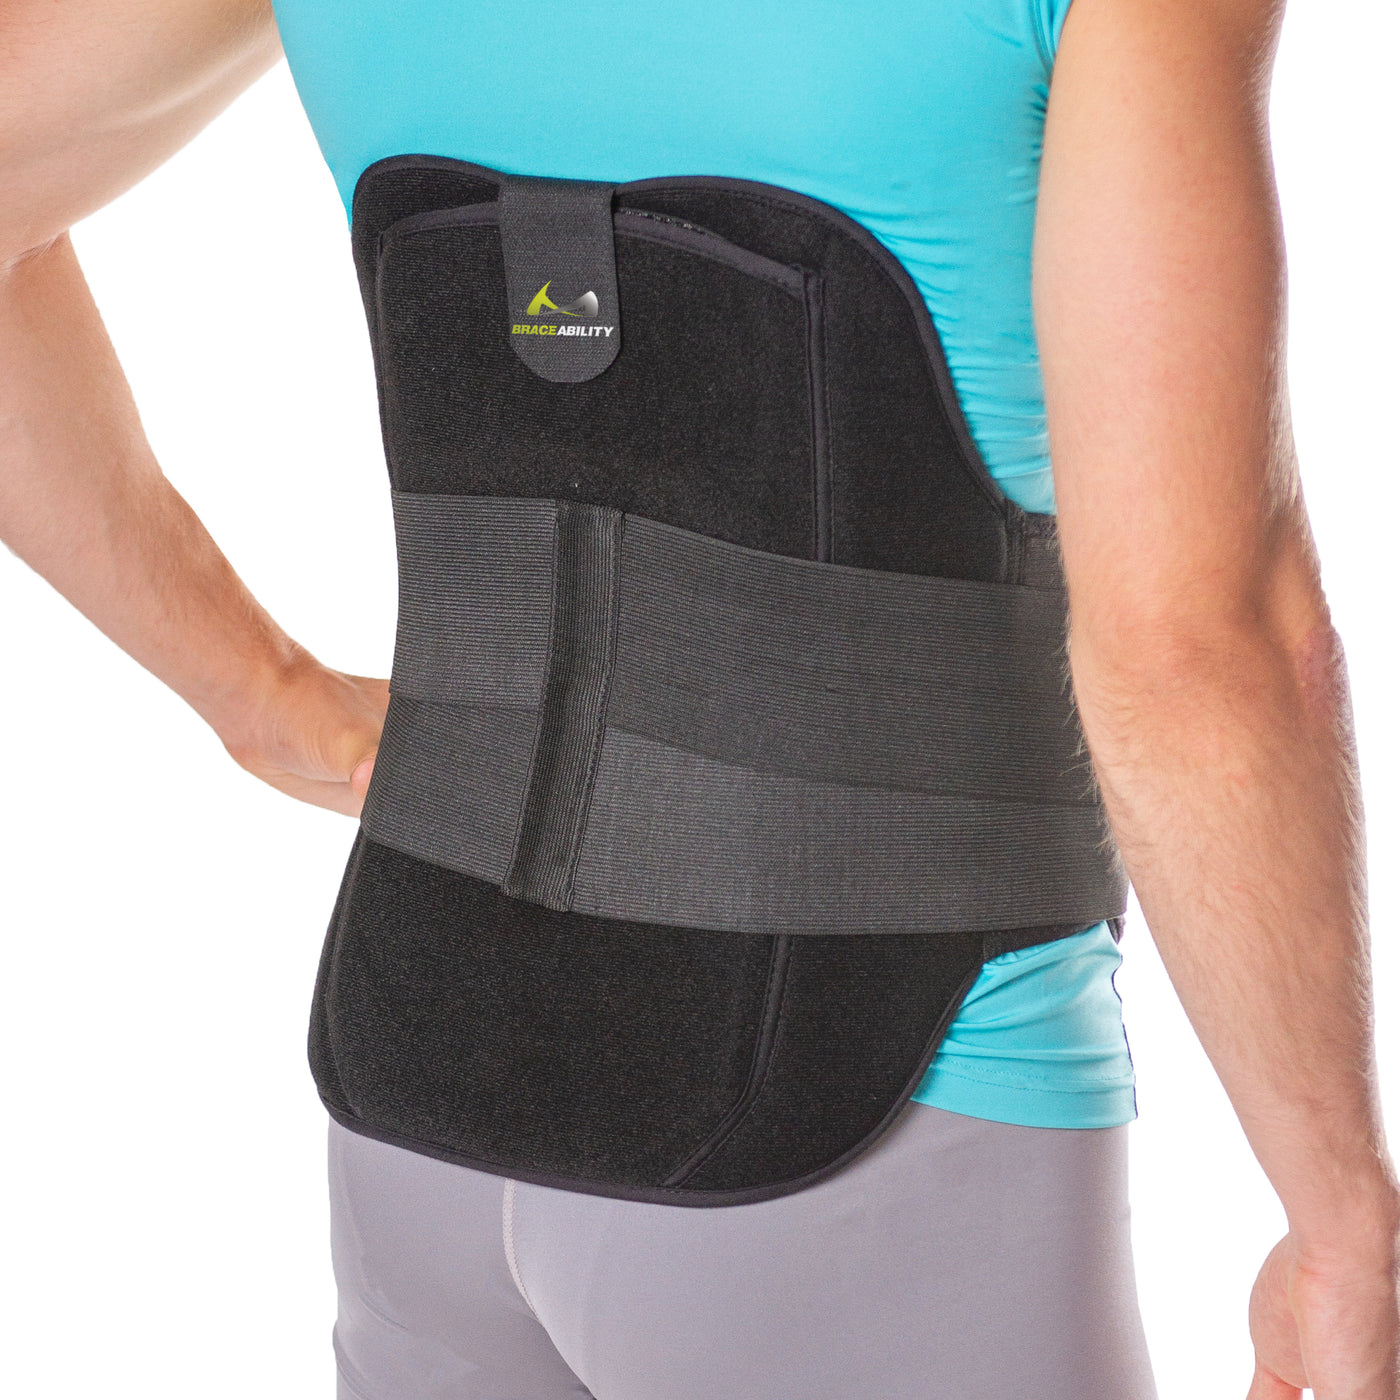  BraceAbility Plus Size Low Back Brace - Compression Lower Back  Support Belt For Sciatica, Heavy Lifting At Work, Herniated Disc, Workouts,  Sleeping, Lumbar Support, Back Pain In Women And Men